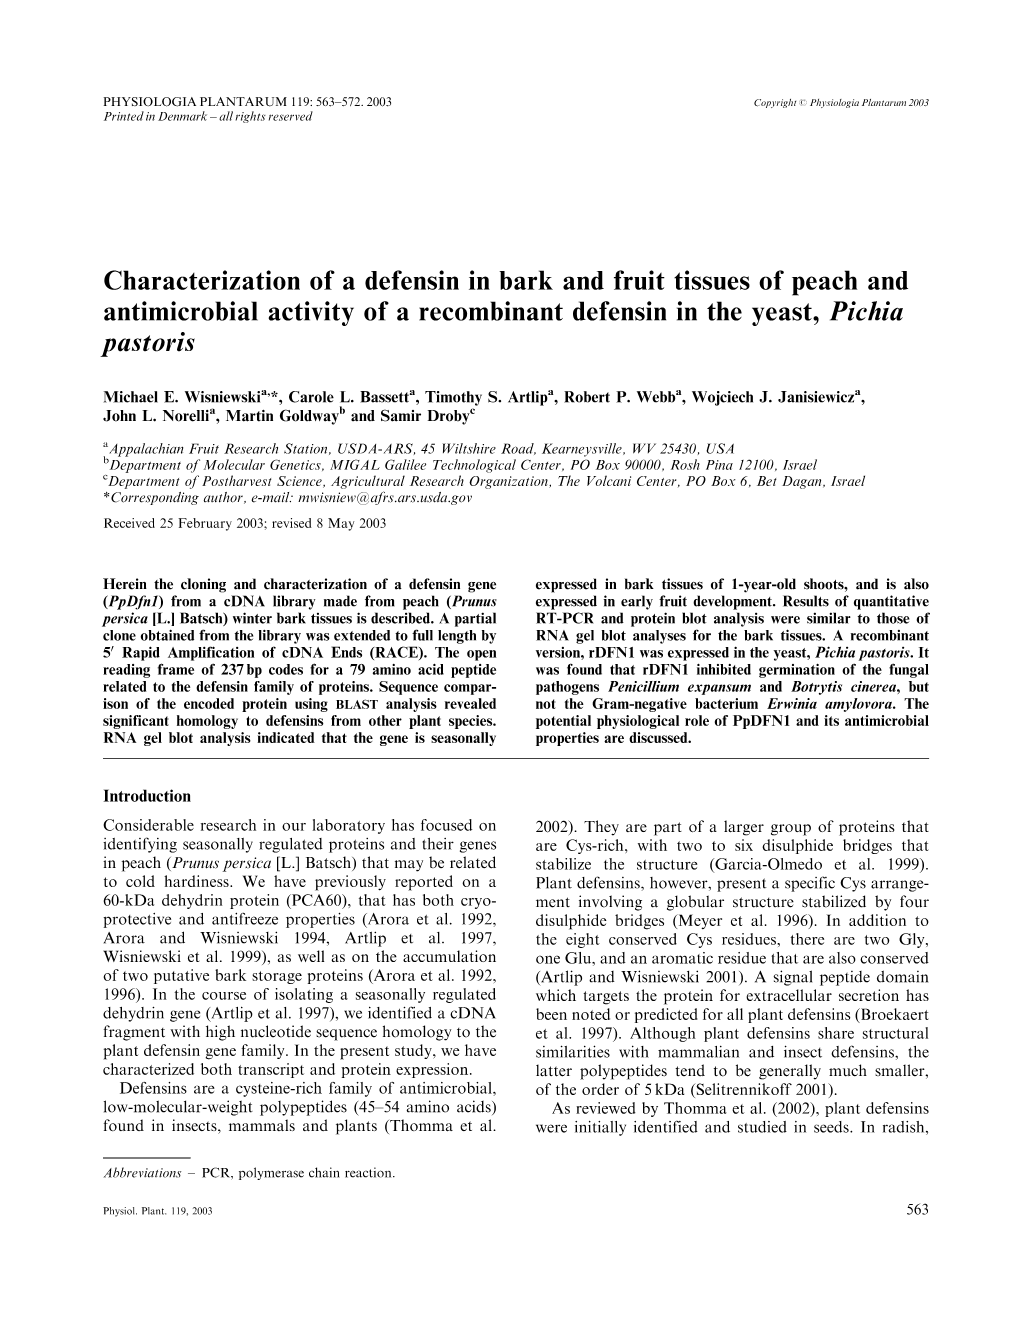 Characterization of a Defensin in Bark and Fruit Tissues of Peach and Antimicrobial Activity of a Recombinant Defensin in the Yeast, Pichia Pastoris